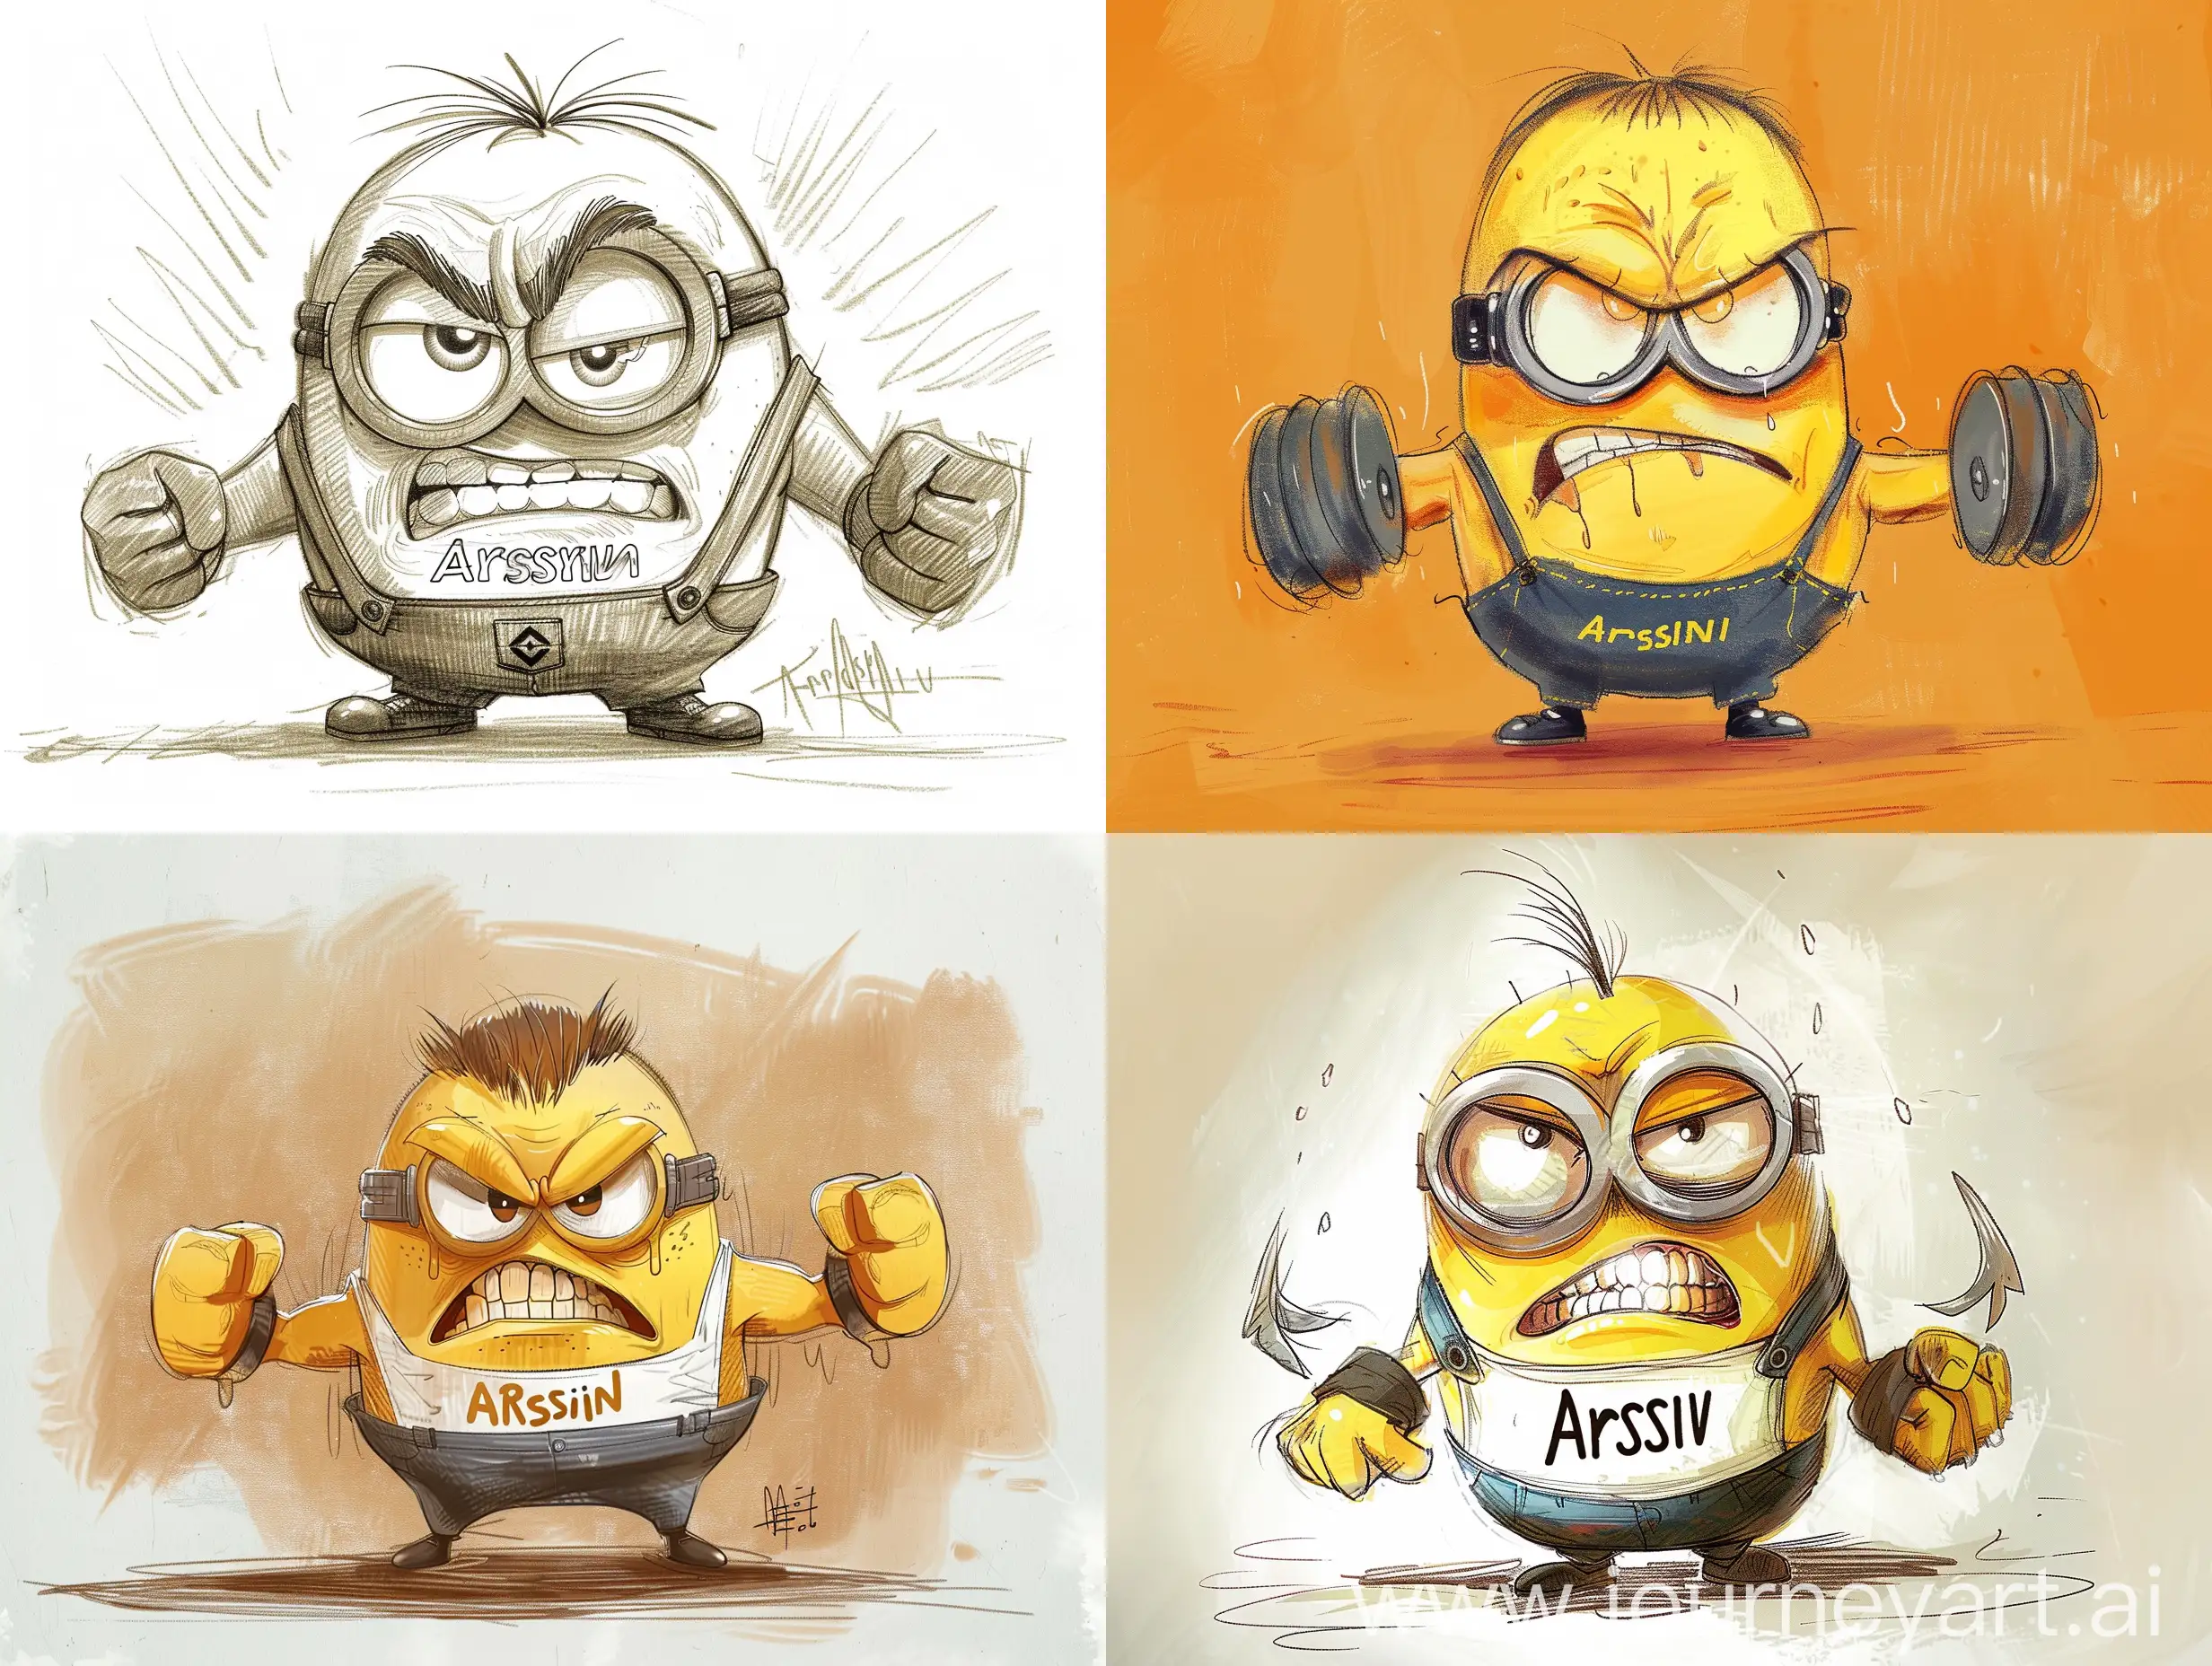 Angry-Bodybuilder-Minion-with-Arsenii-TShirt